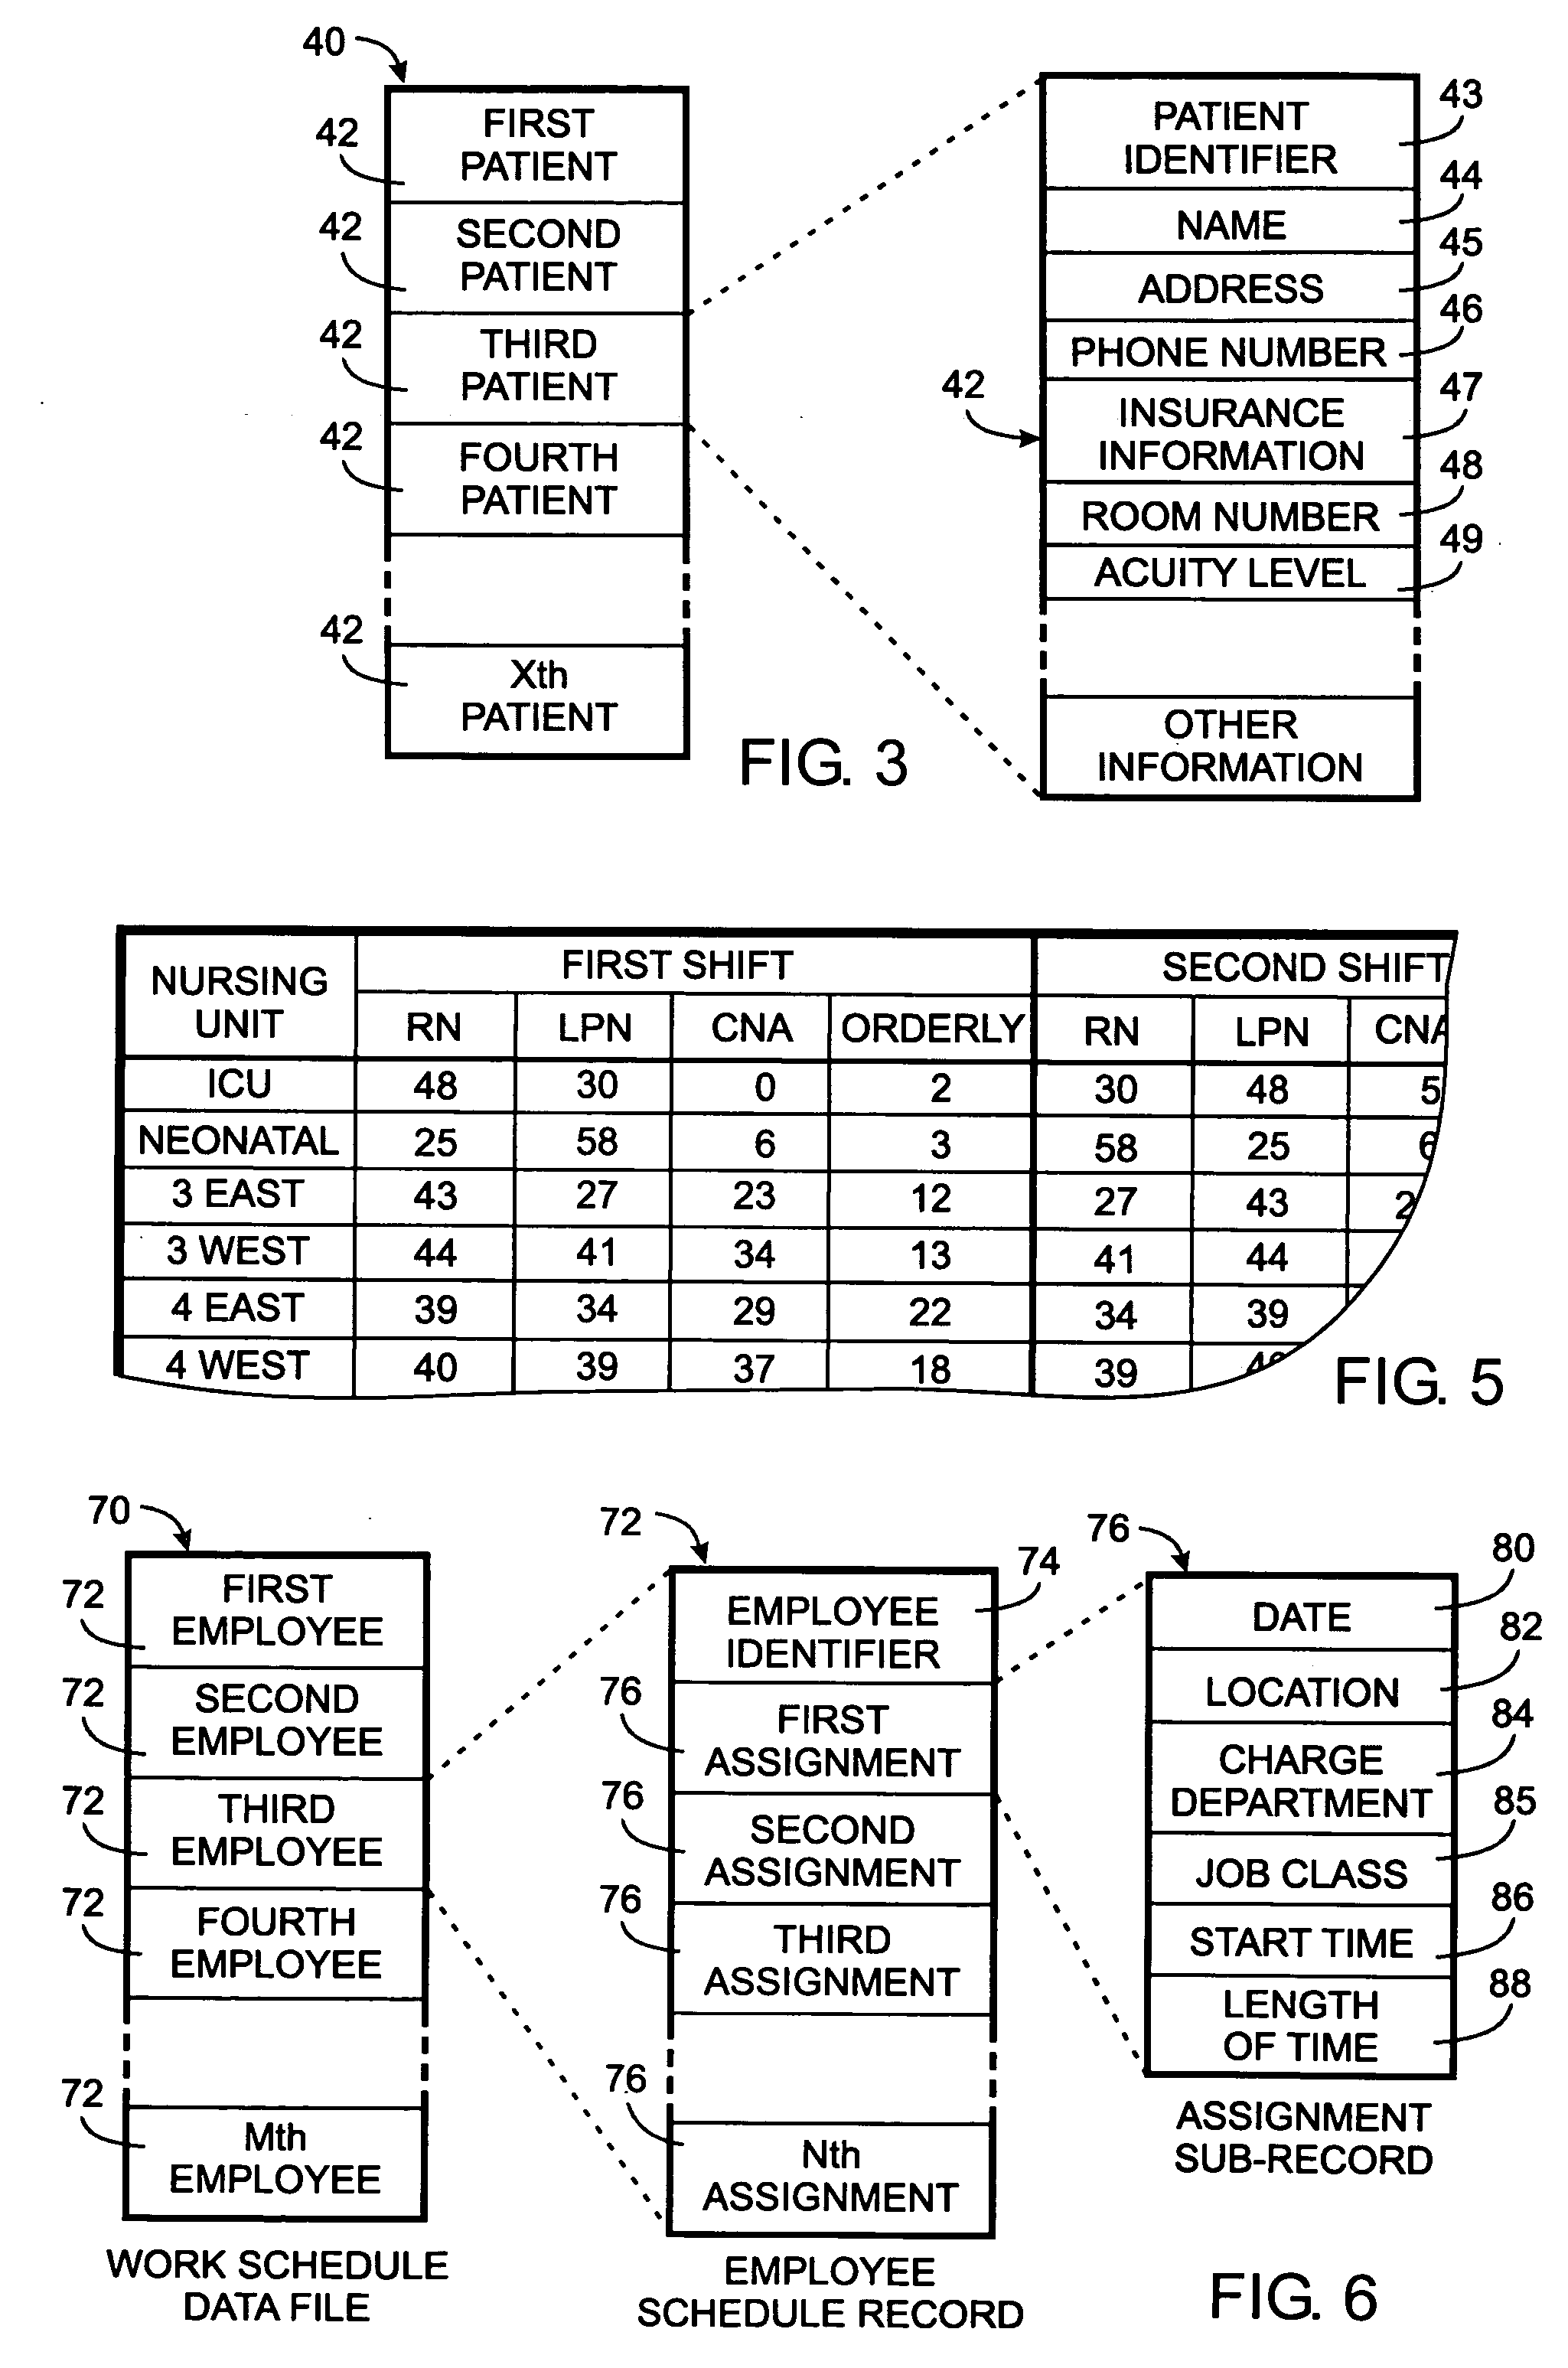 Medical facility employee scheduling method using patient acuity information